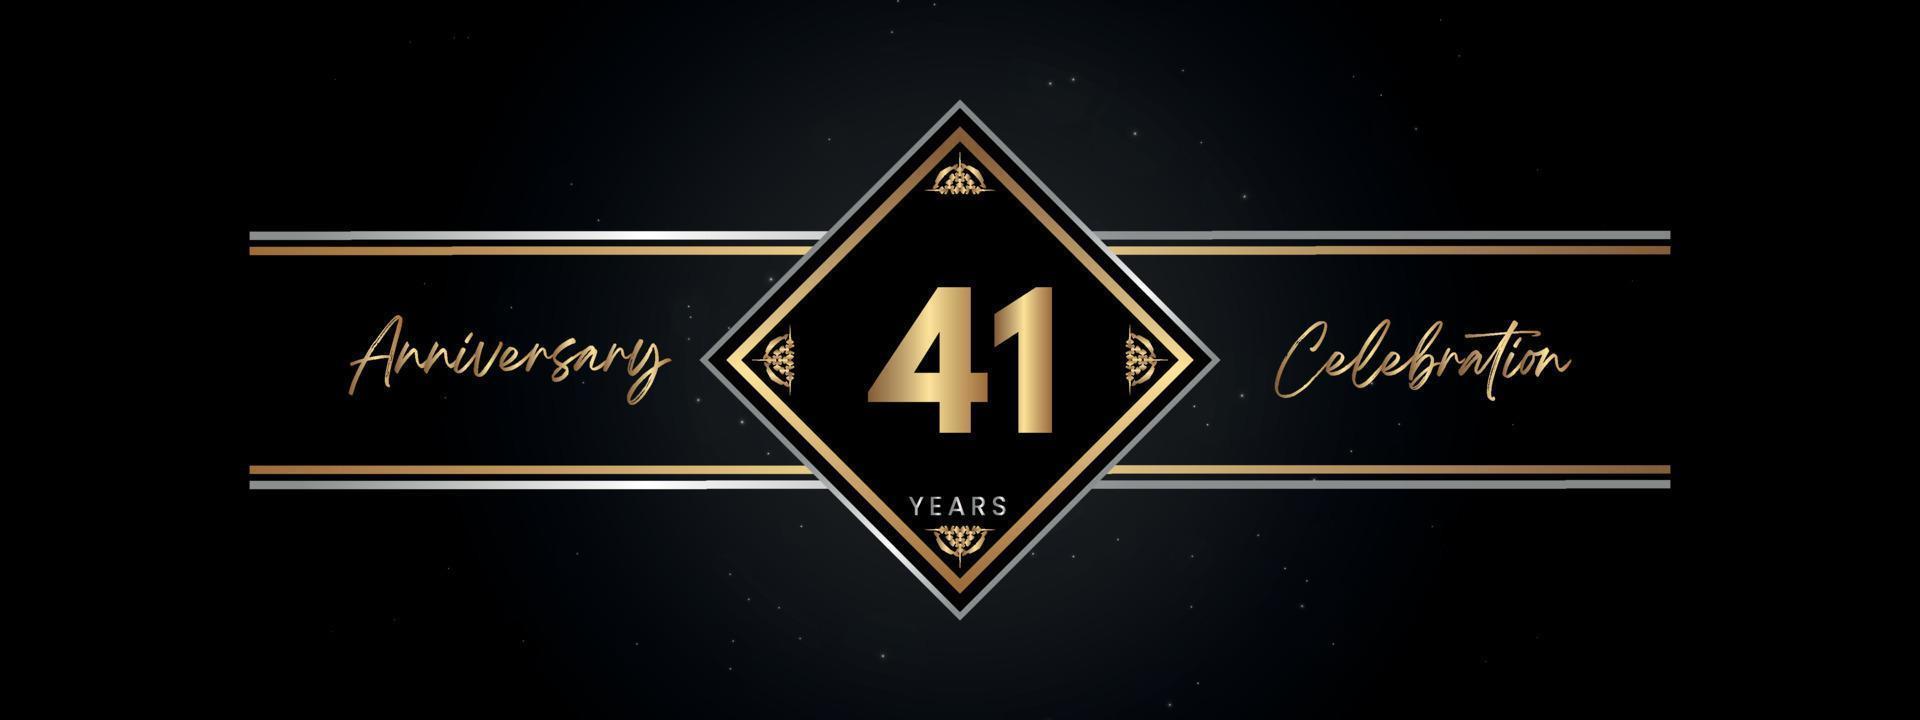 41 years anniversary golden color with decorative frame isolated on black background for anniversary celebration event, birthday party, brochure, greeting card. 41 Year Anniversary Template Design vector